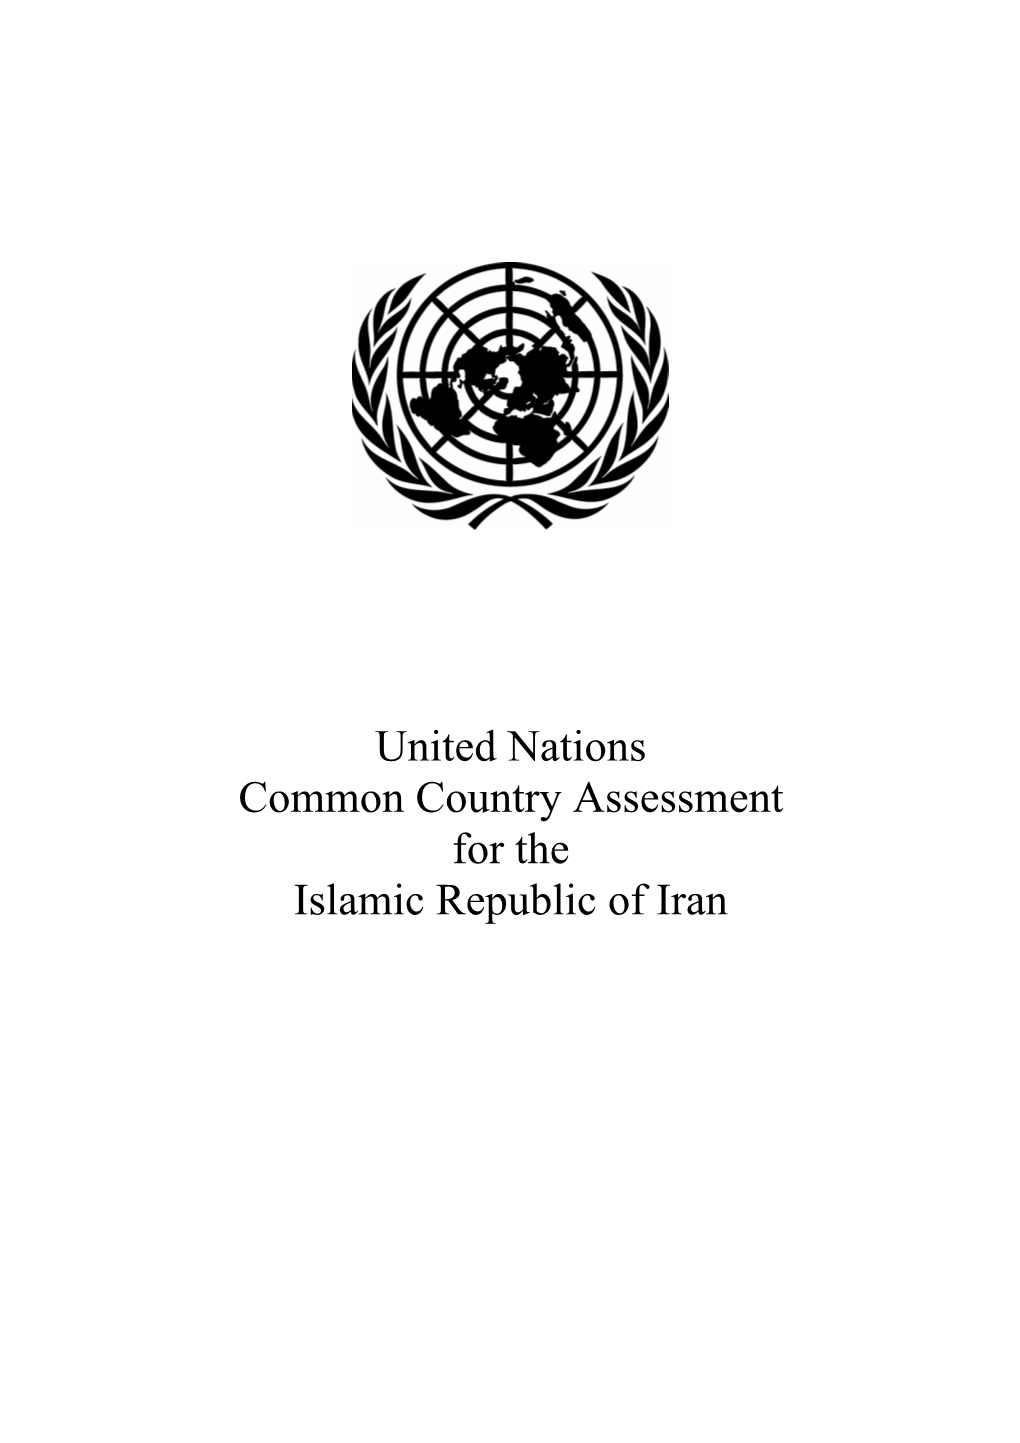 Common Country Assessment Document of Islamic Republic of Iran